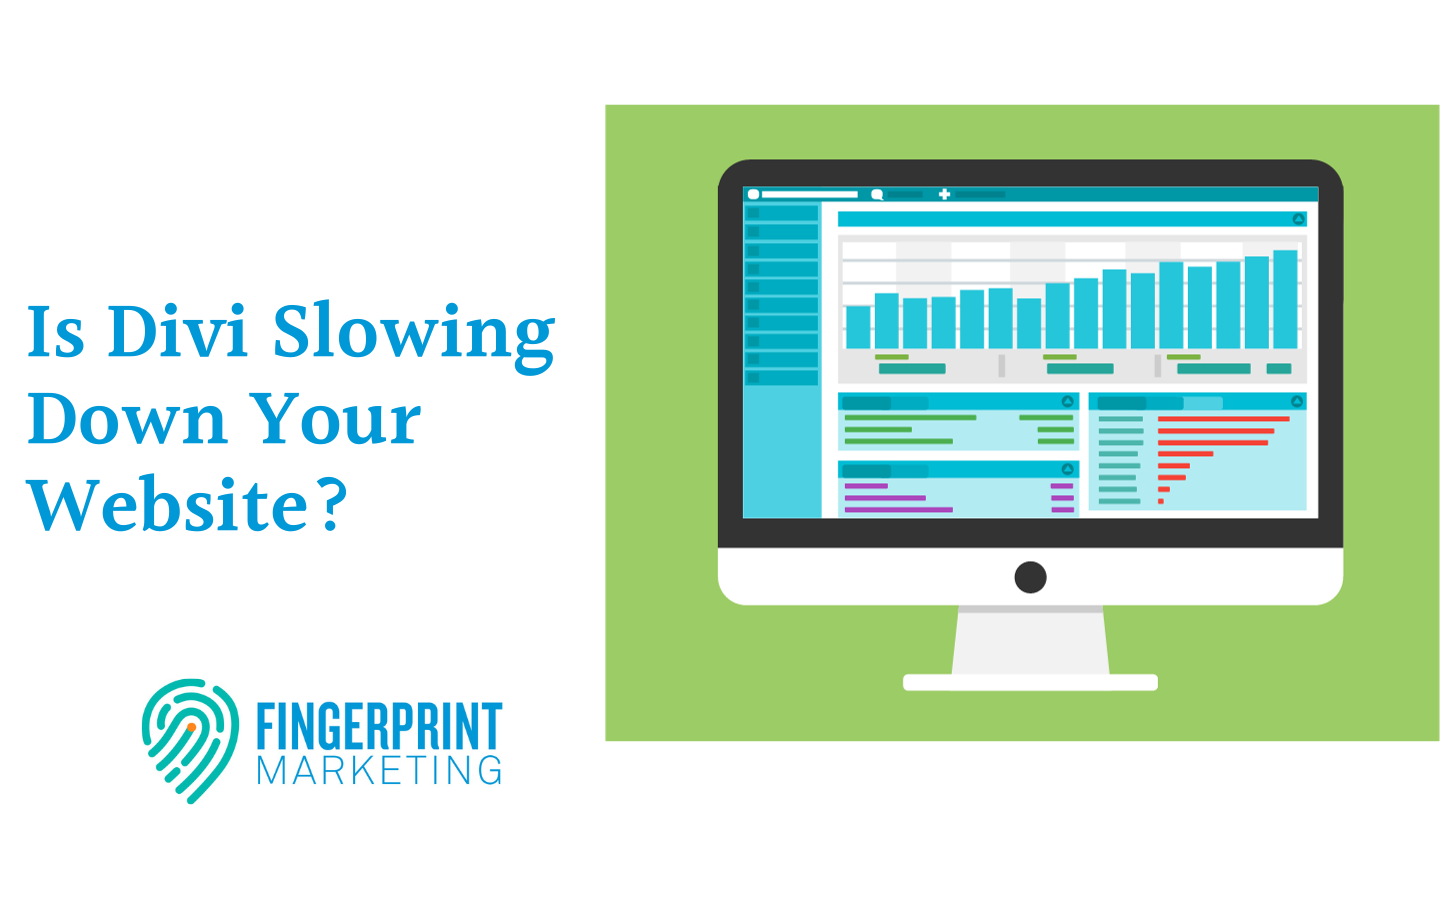 Is Divi Slowing Down Your Website?